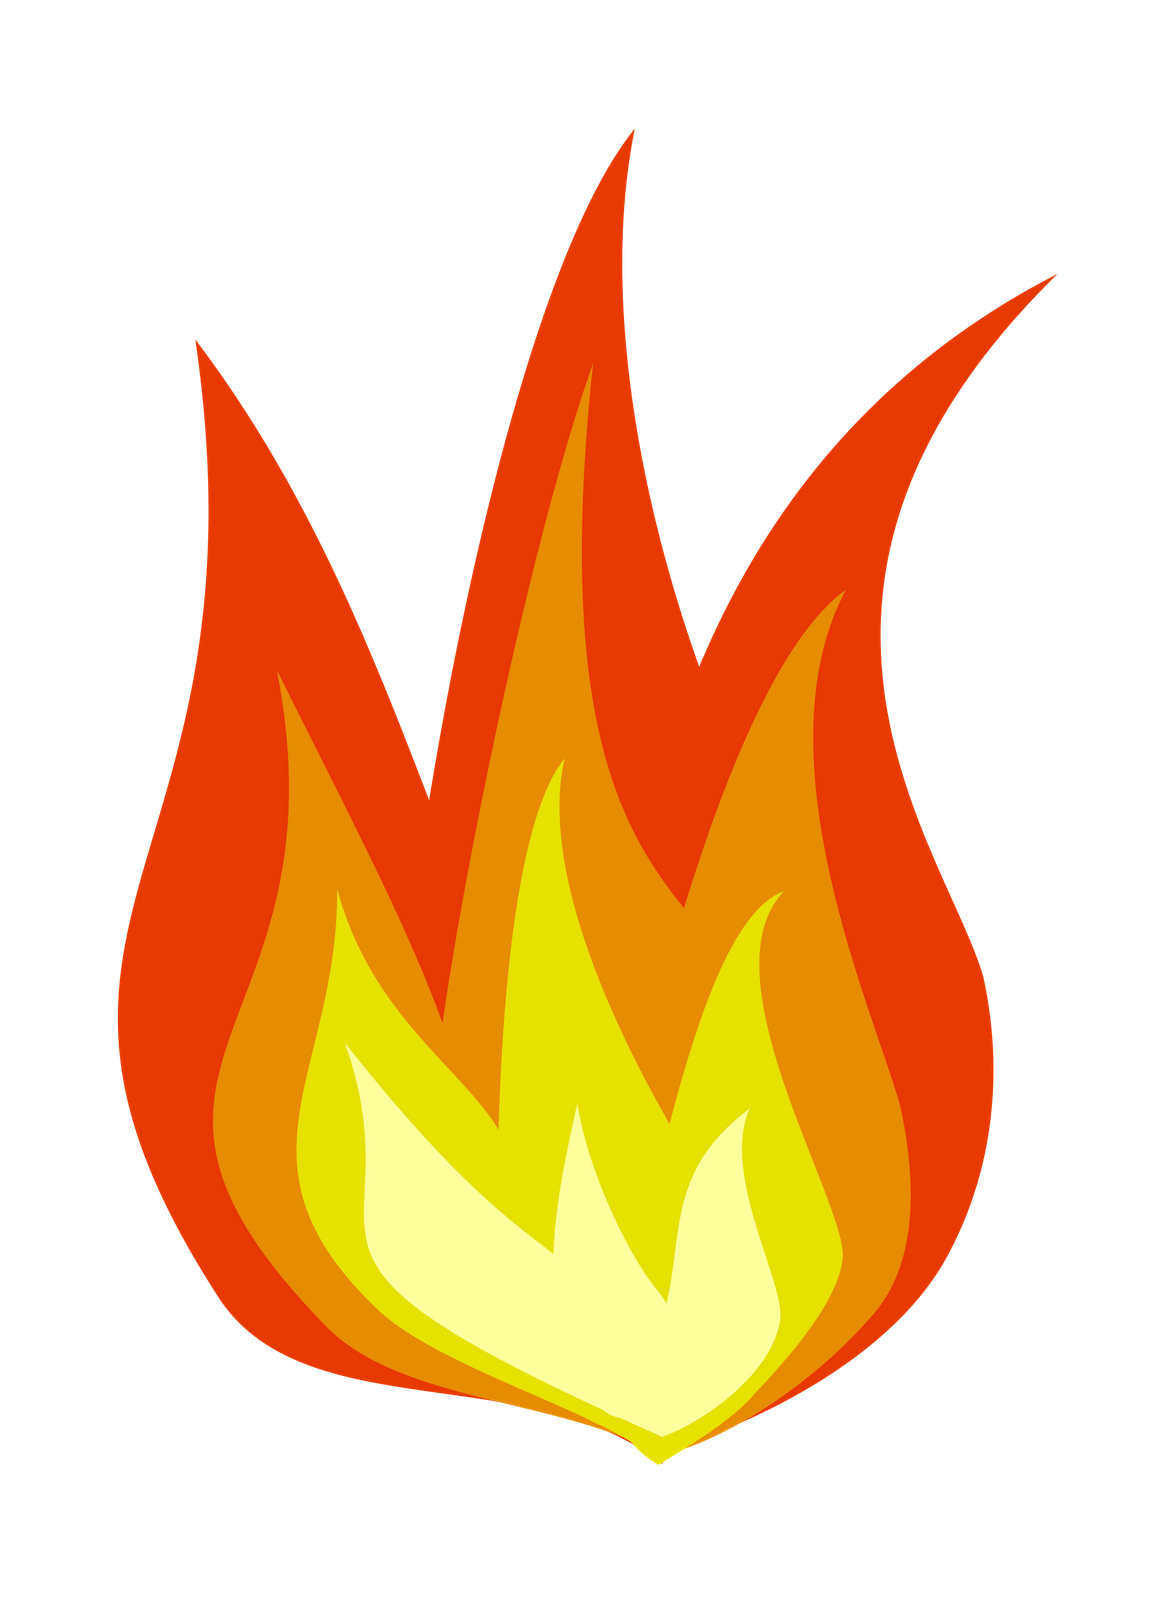 Holy spirit flames clipart